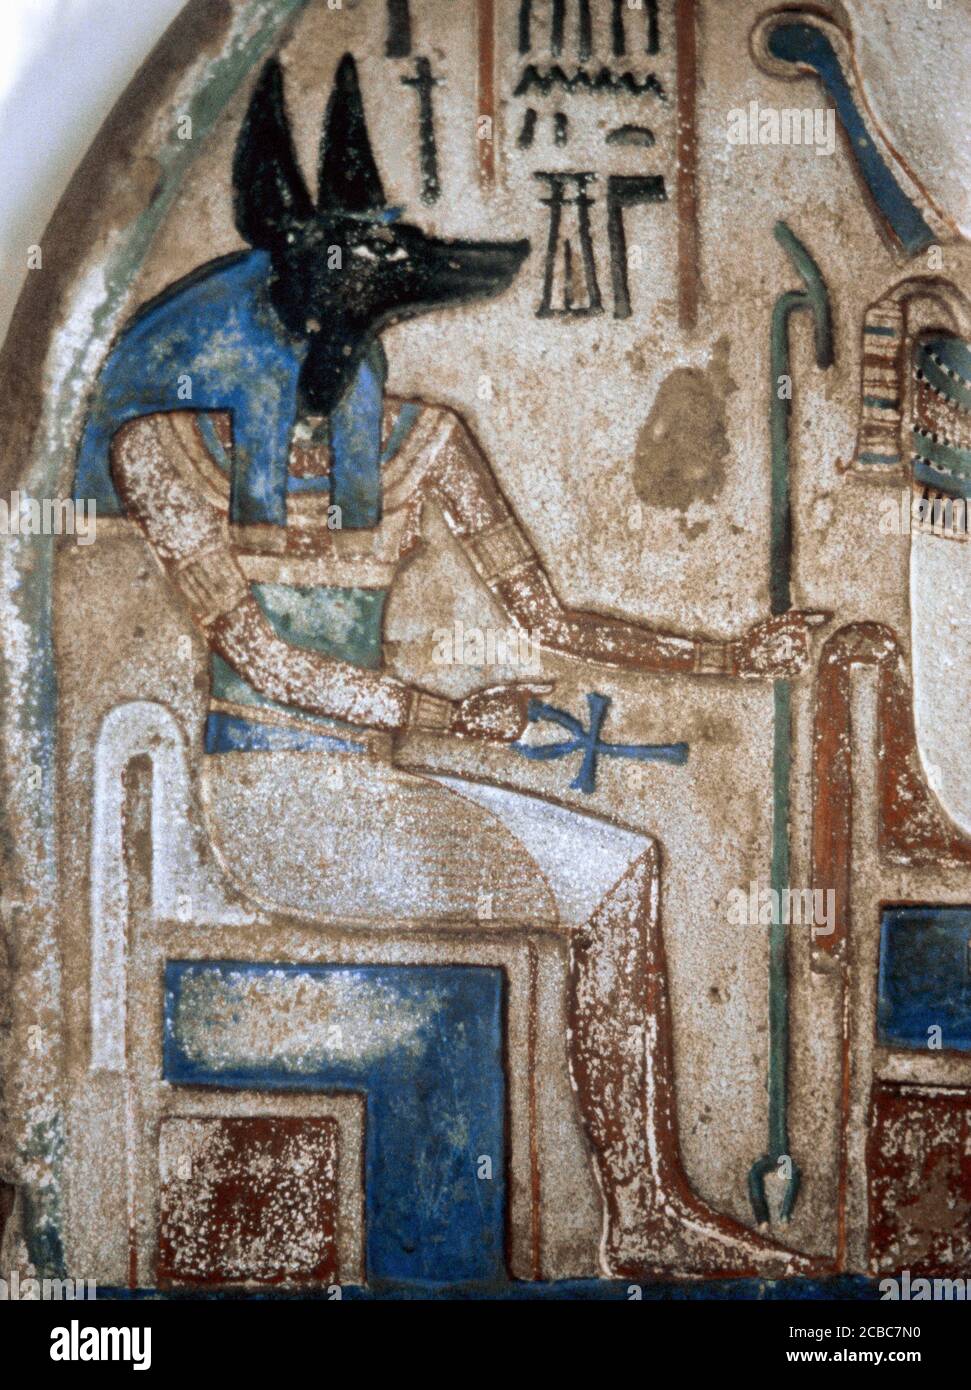 Stele of Nanai. Detail with depiction of the god Anubis. Late 18th Dynasty. New Kingdom of Egypt. Calcareous and polychrome stone. The Egyptian Museum of Turin, Italy. Stock Photo